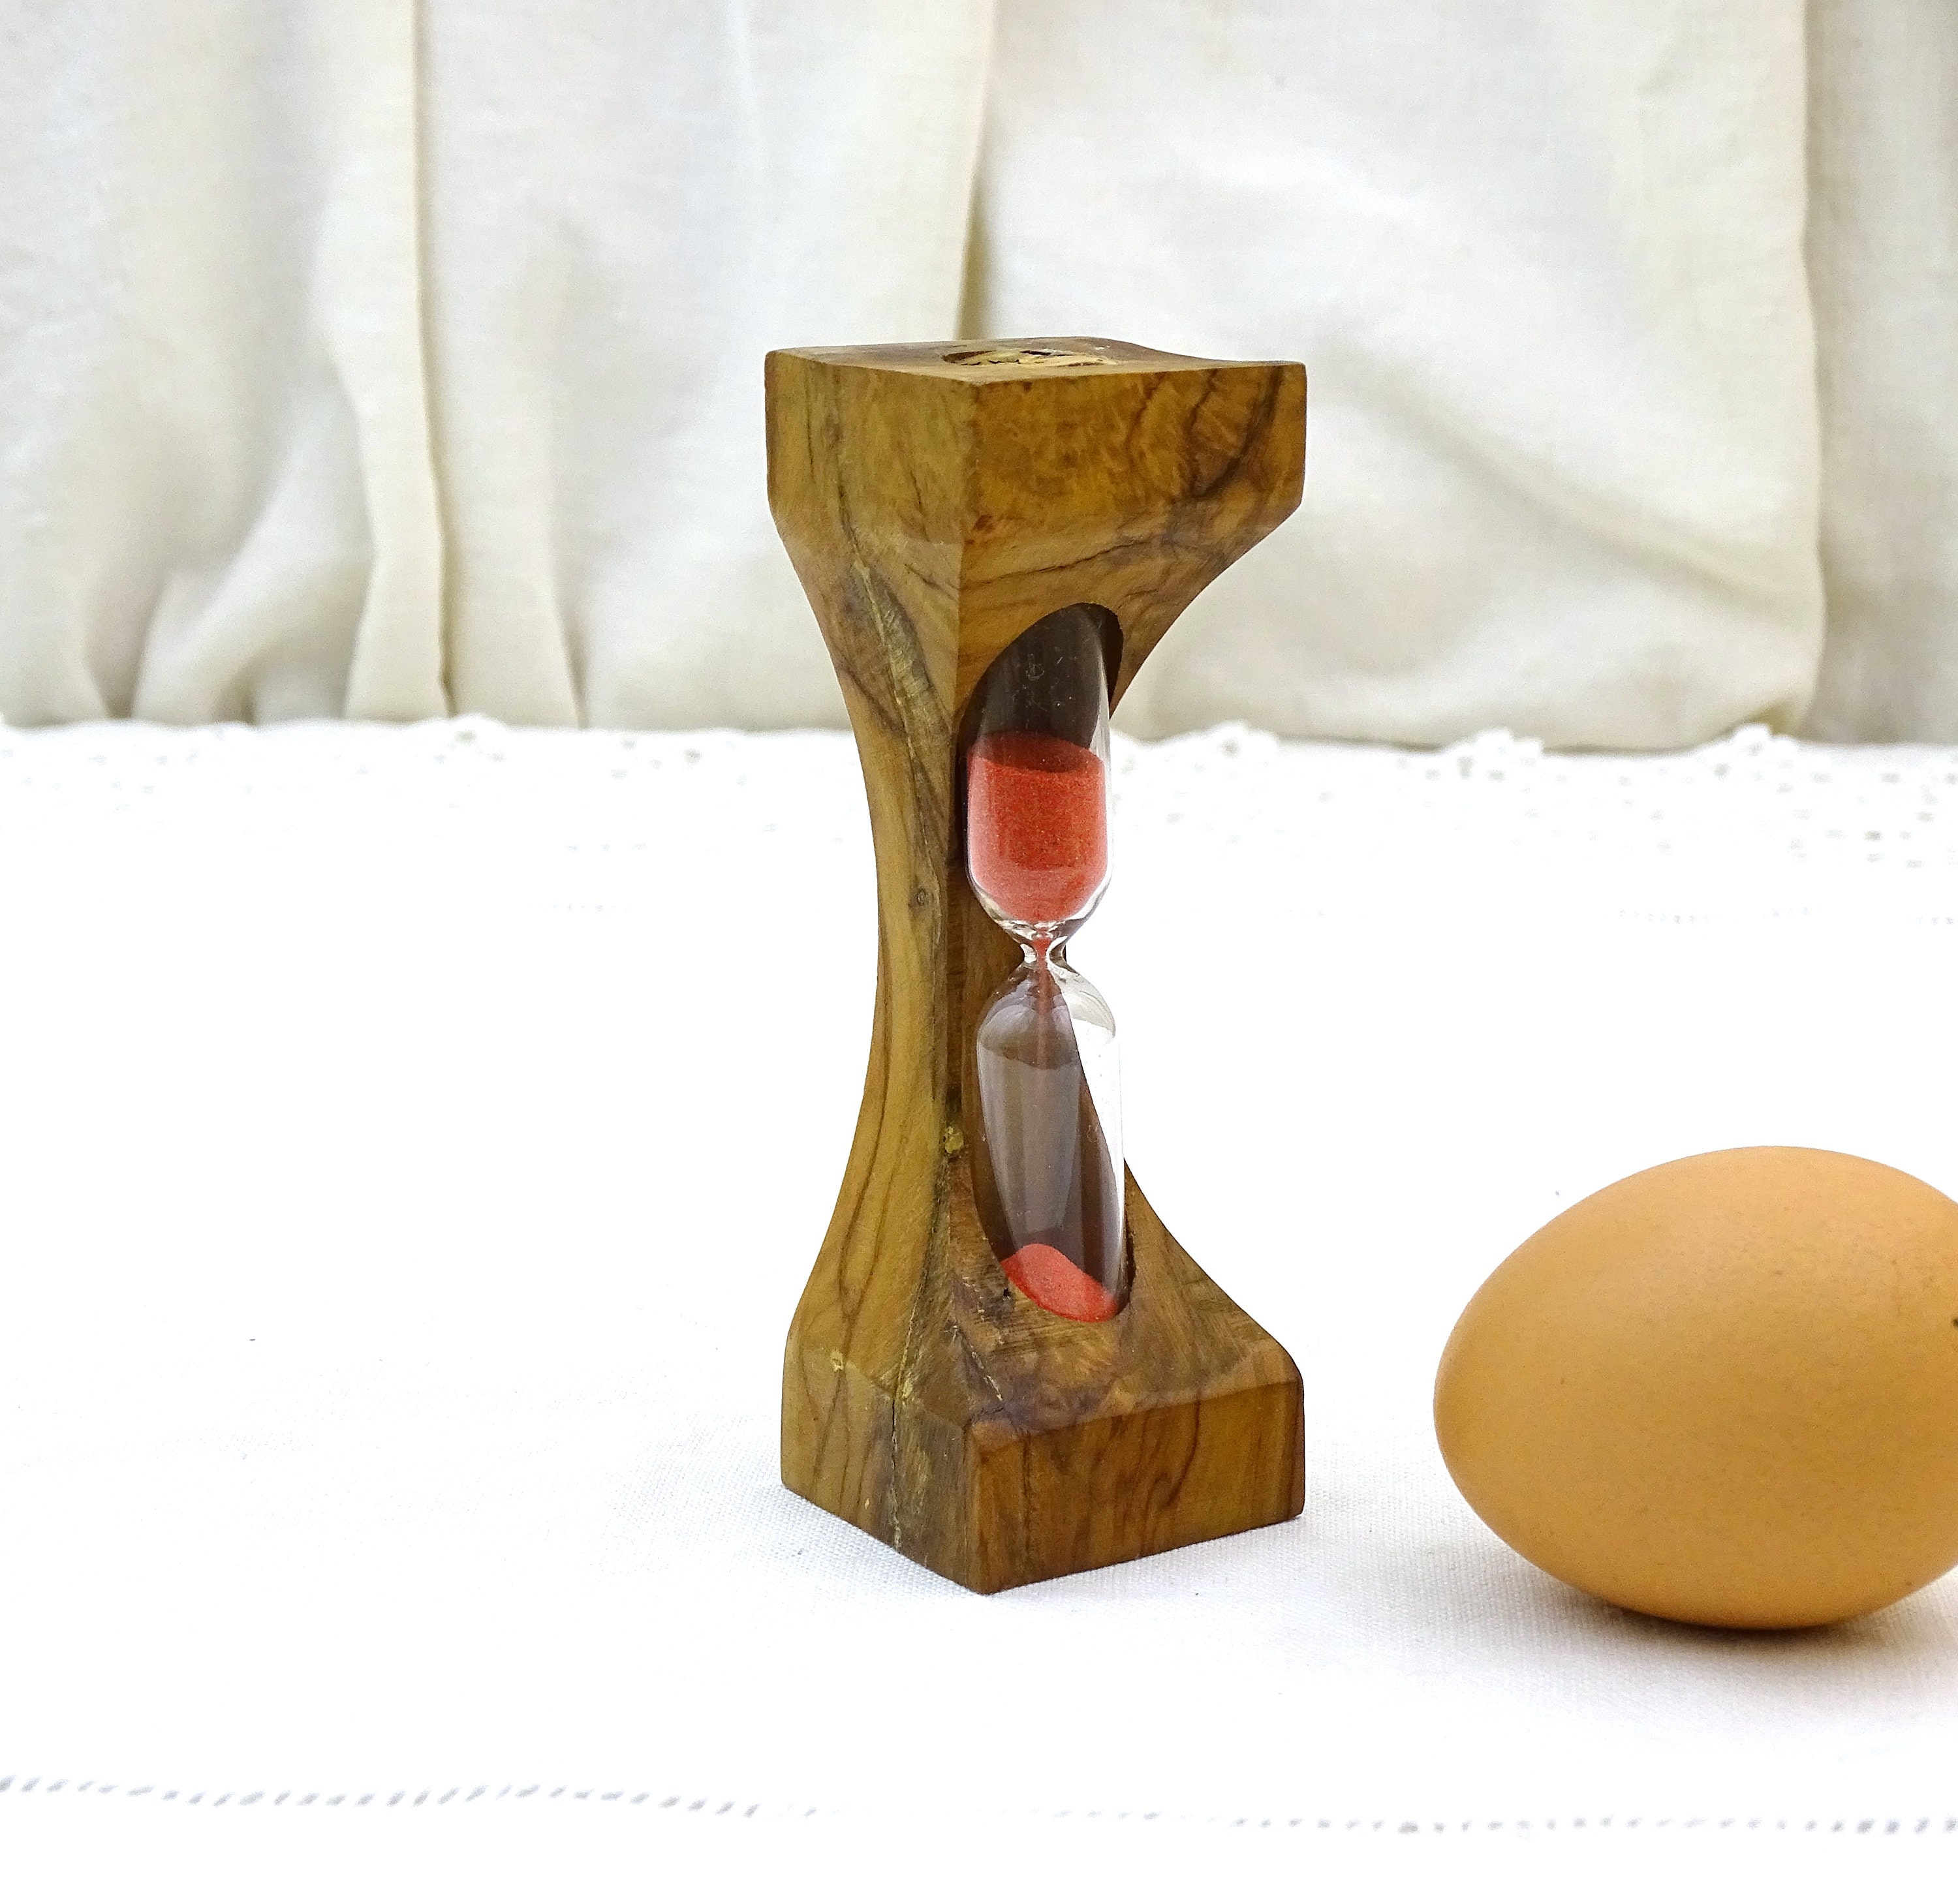 French Vintage Olive Wood Mid Century Modern Egg Timer With Pink Sand,  1960s Kitchen Count Down Hour Glass From France, Old Style Cooking -   Israel